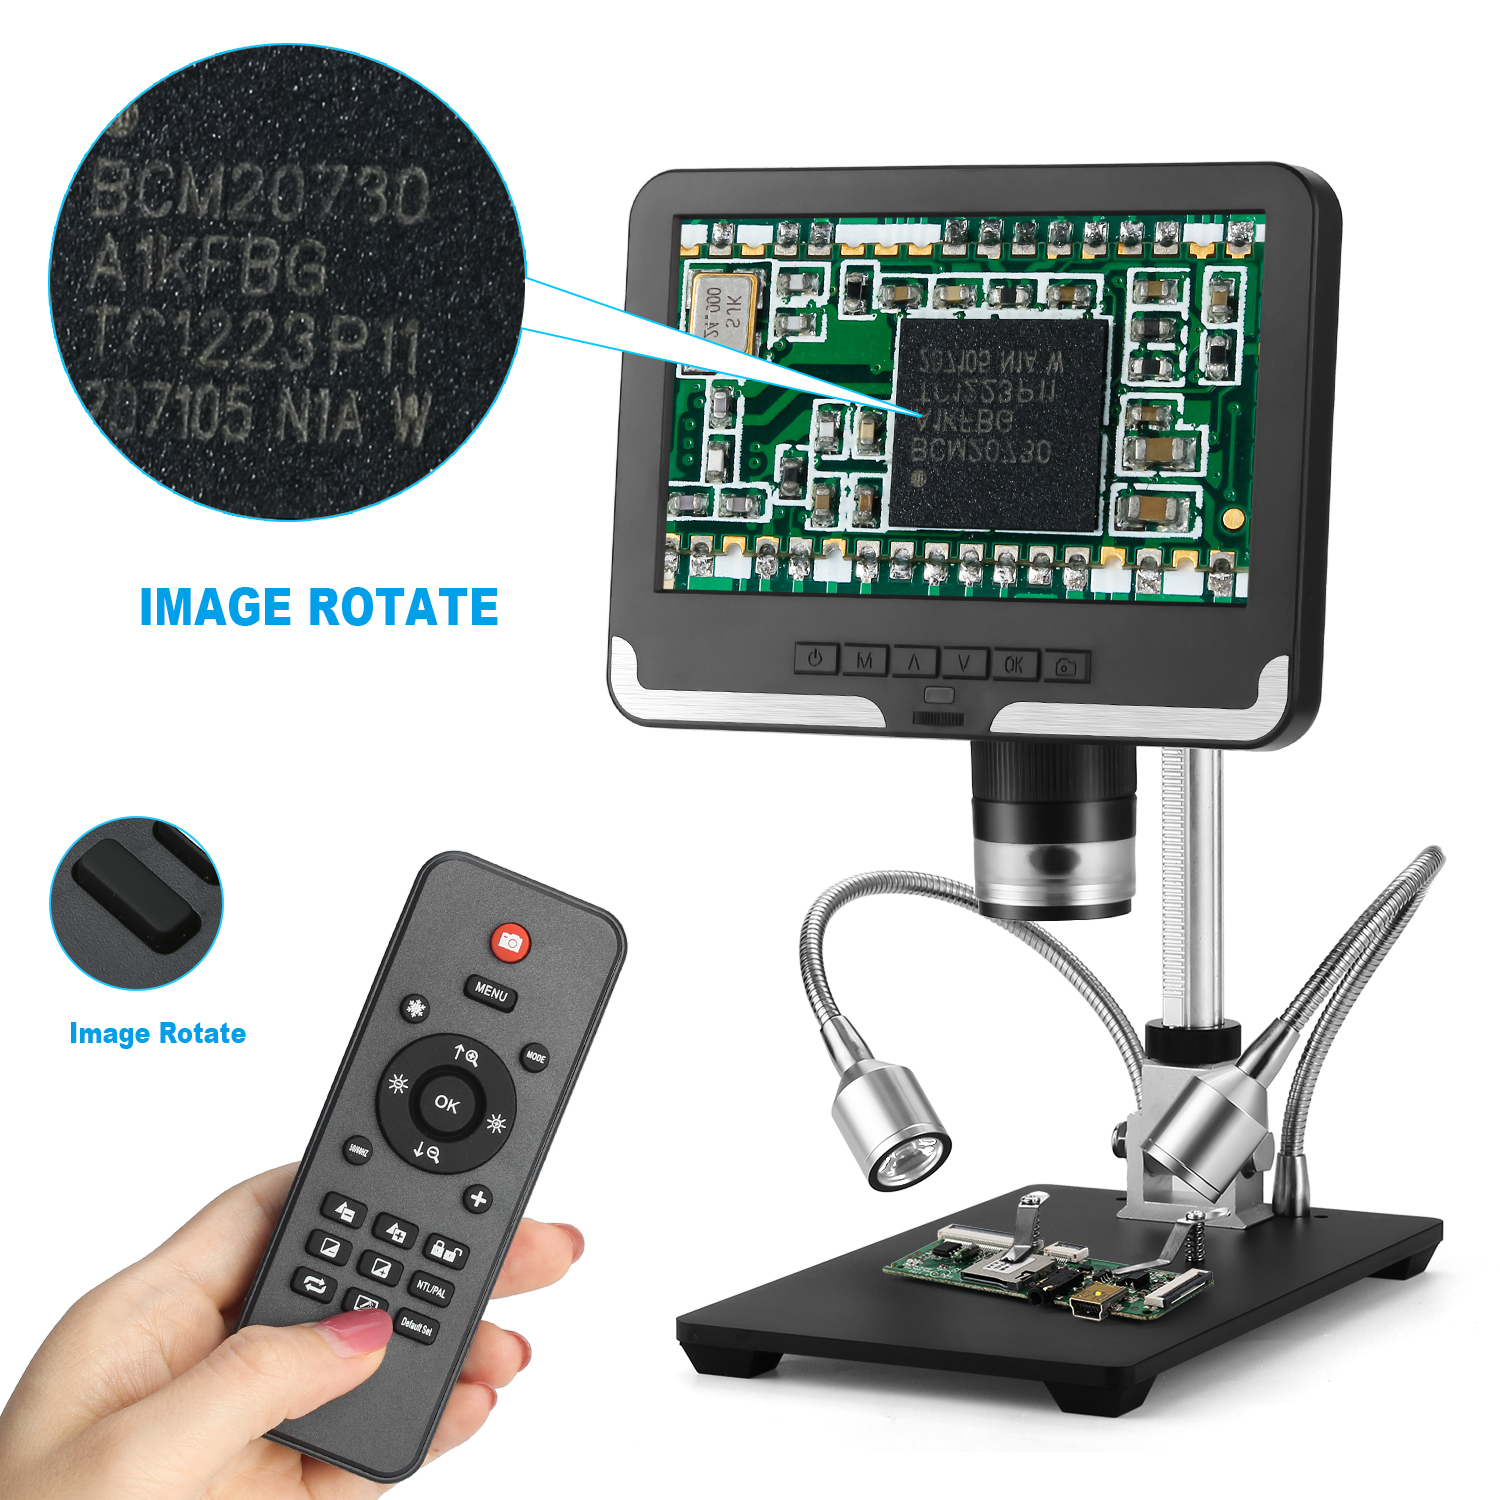 Andonstar-AD206-1080P-3D-Digital-Microscope-Soldering-Microscope-for-Phone-Repairing-SMD--SMT-1593356-2